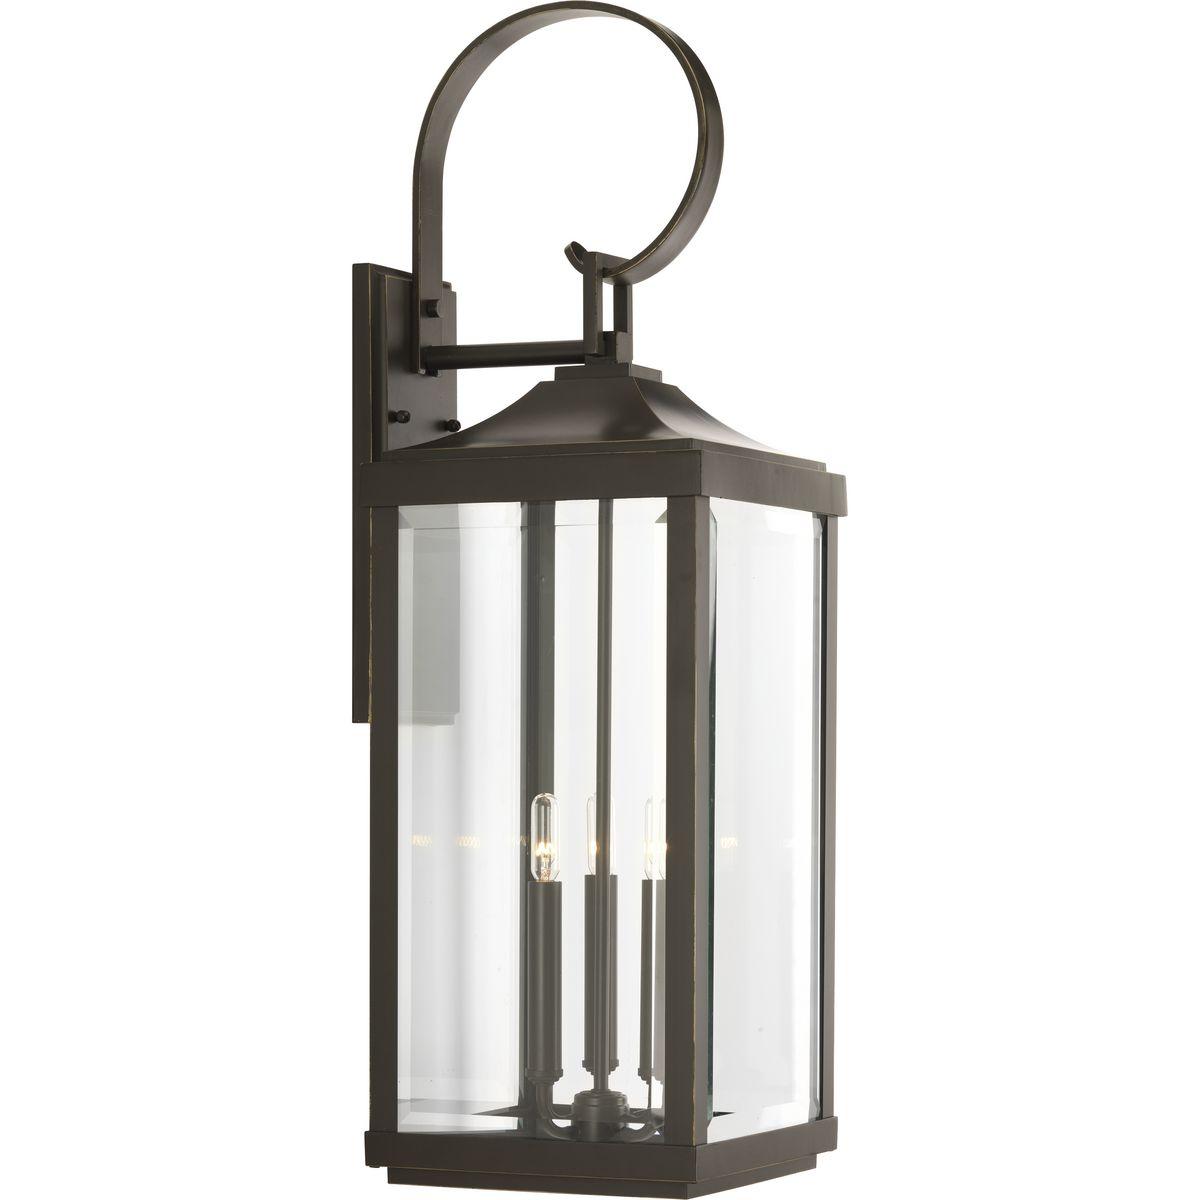 Hubbell P560023-020 Elongated frames capture the romantic charm of vintage gas lanterns. Inspired by a stroll down a Charlestonian street bearing the same name, the three-light wall lantern in the Gibbes Street outdoor lantern collection features clear beveled glass and an A